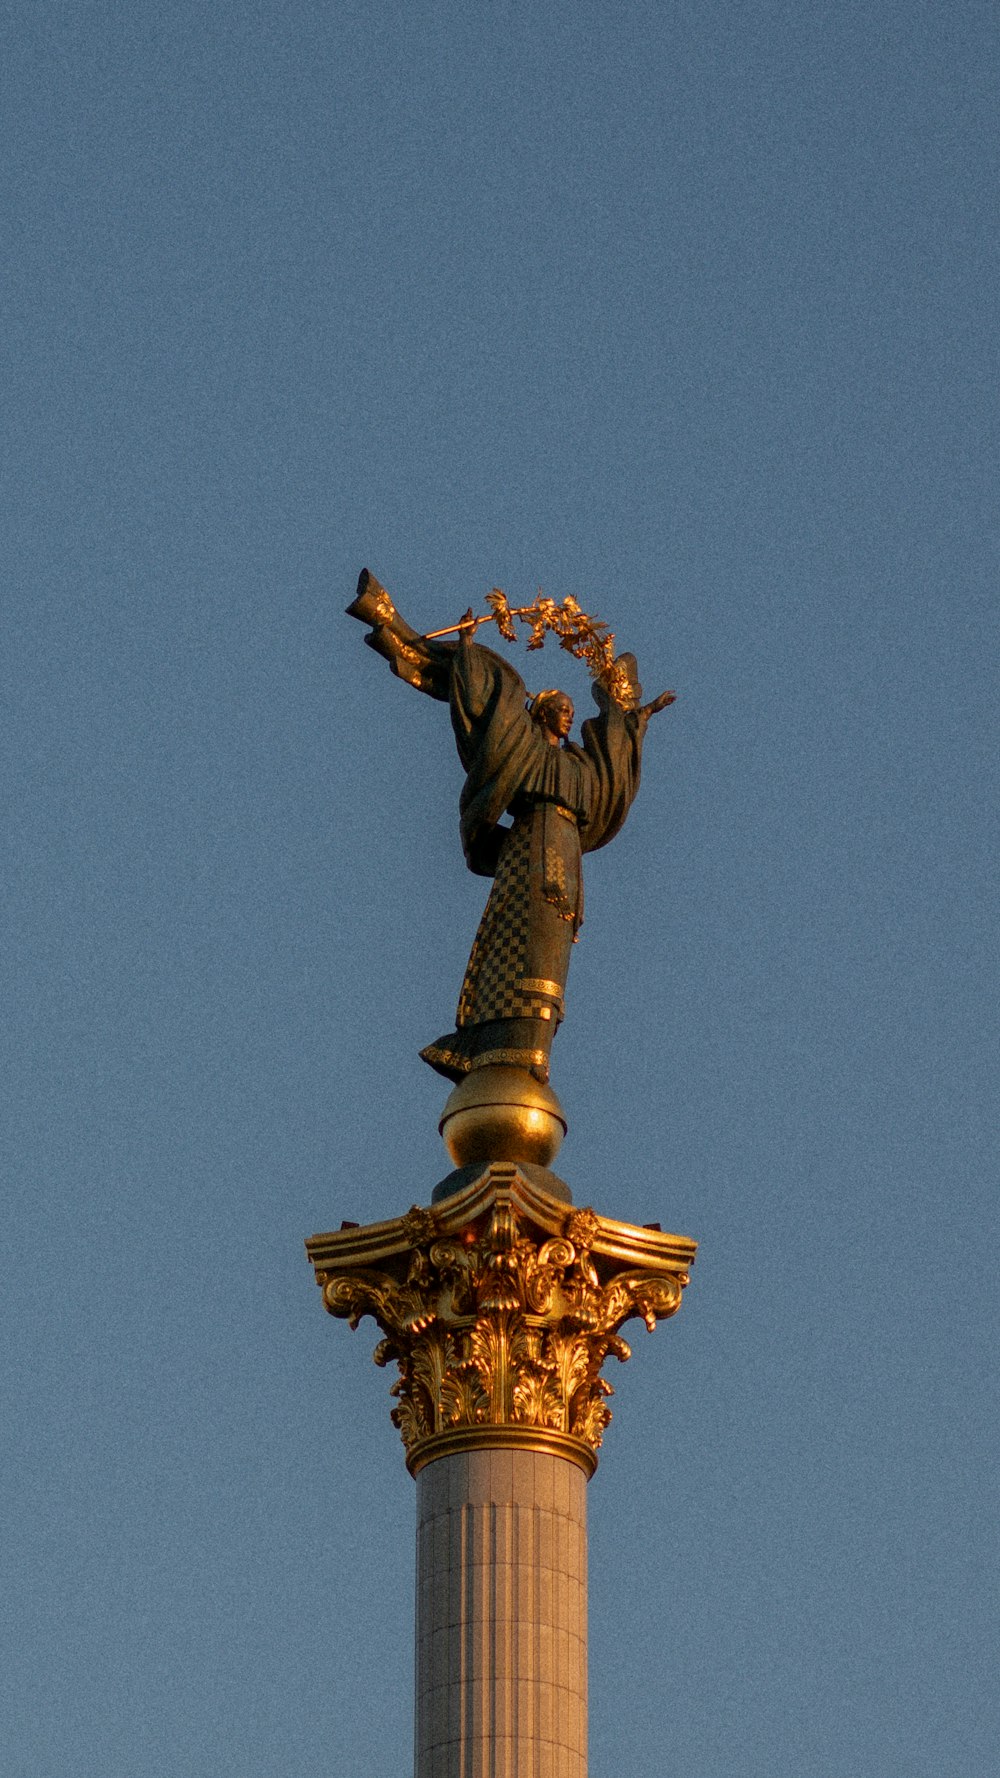 a statue on top of a tall building